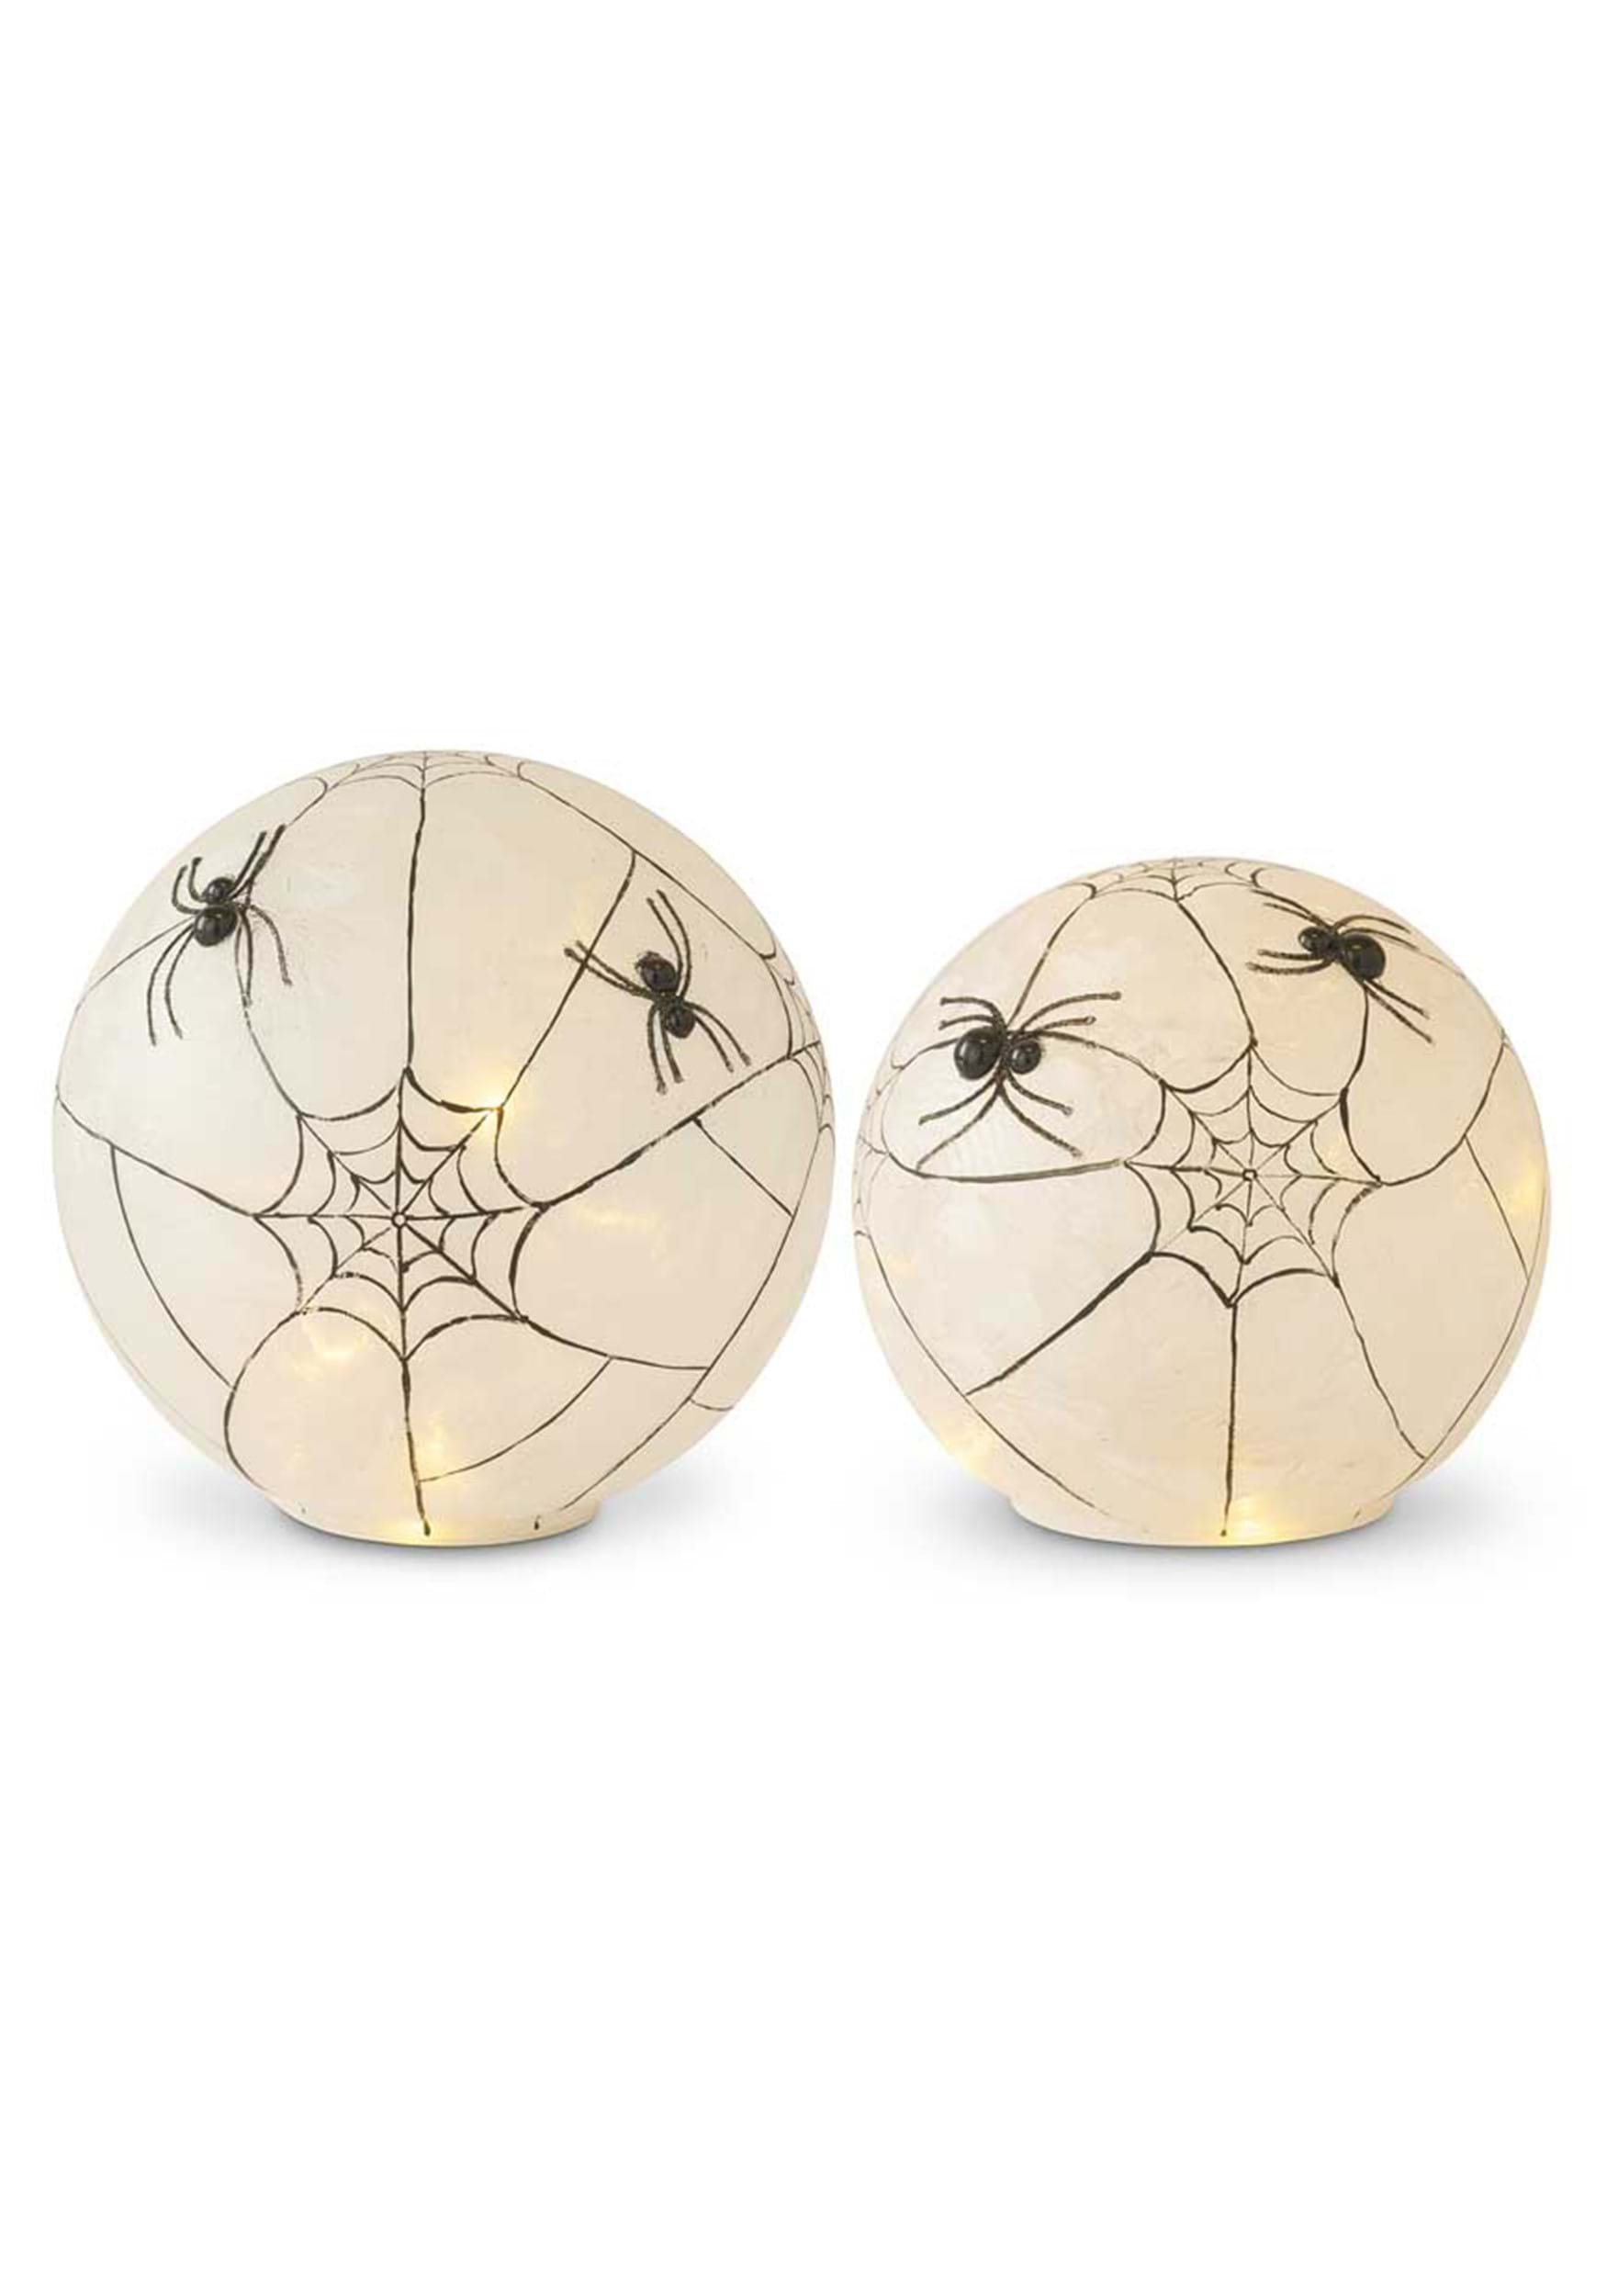 Frosted Glass LED Spider Web Globes w/Timer –  Set of 2